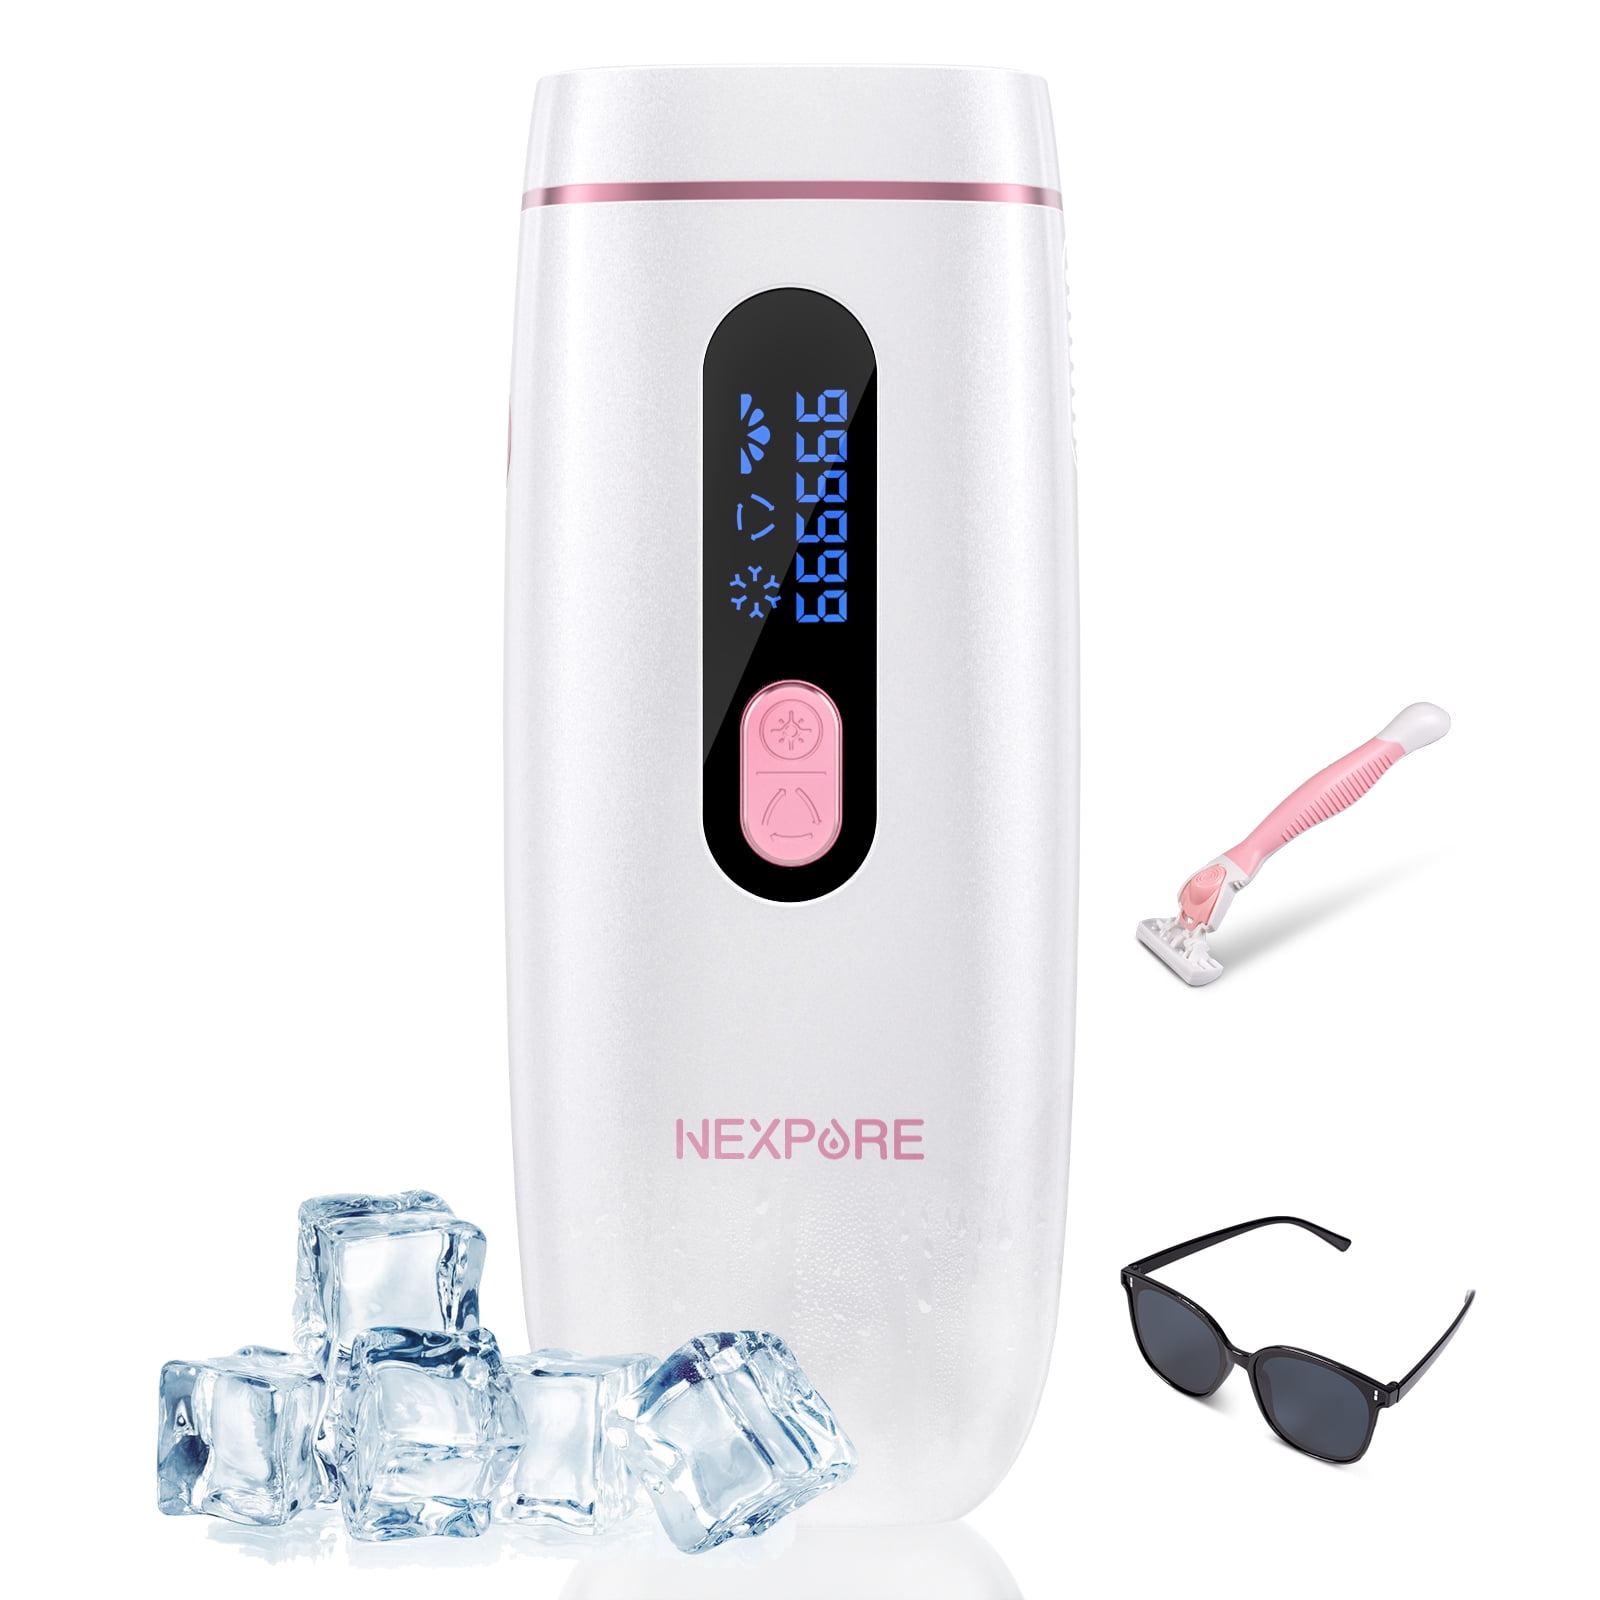 The 10 Best At-Home Laser Hair Removal Devices in 2023